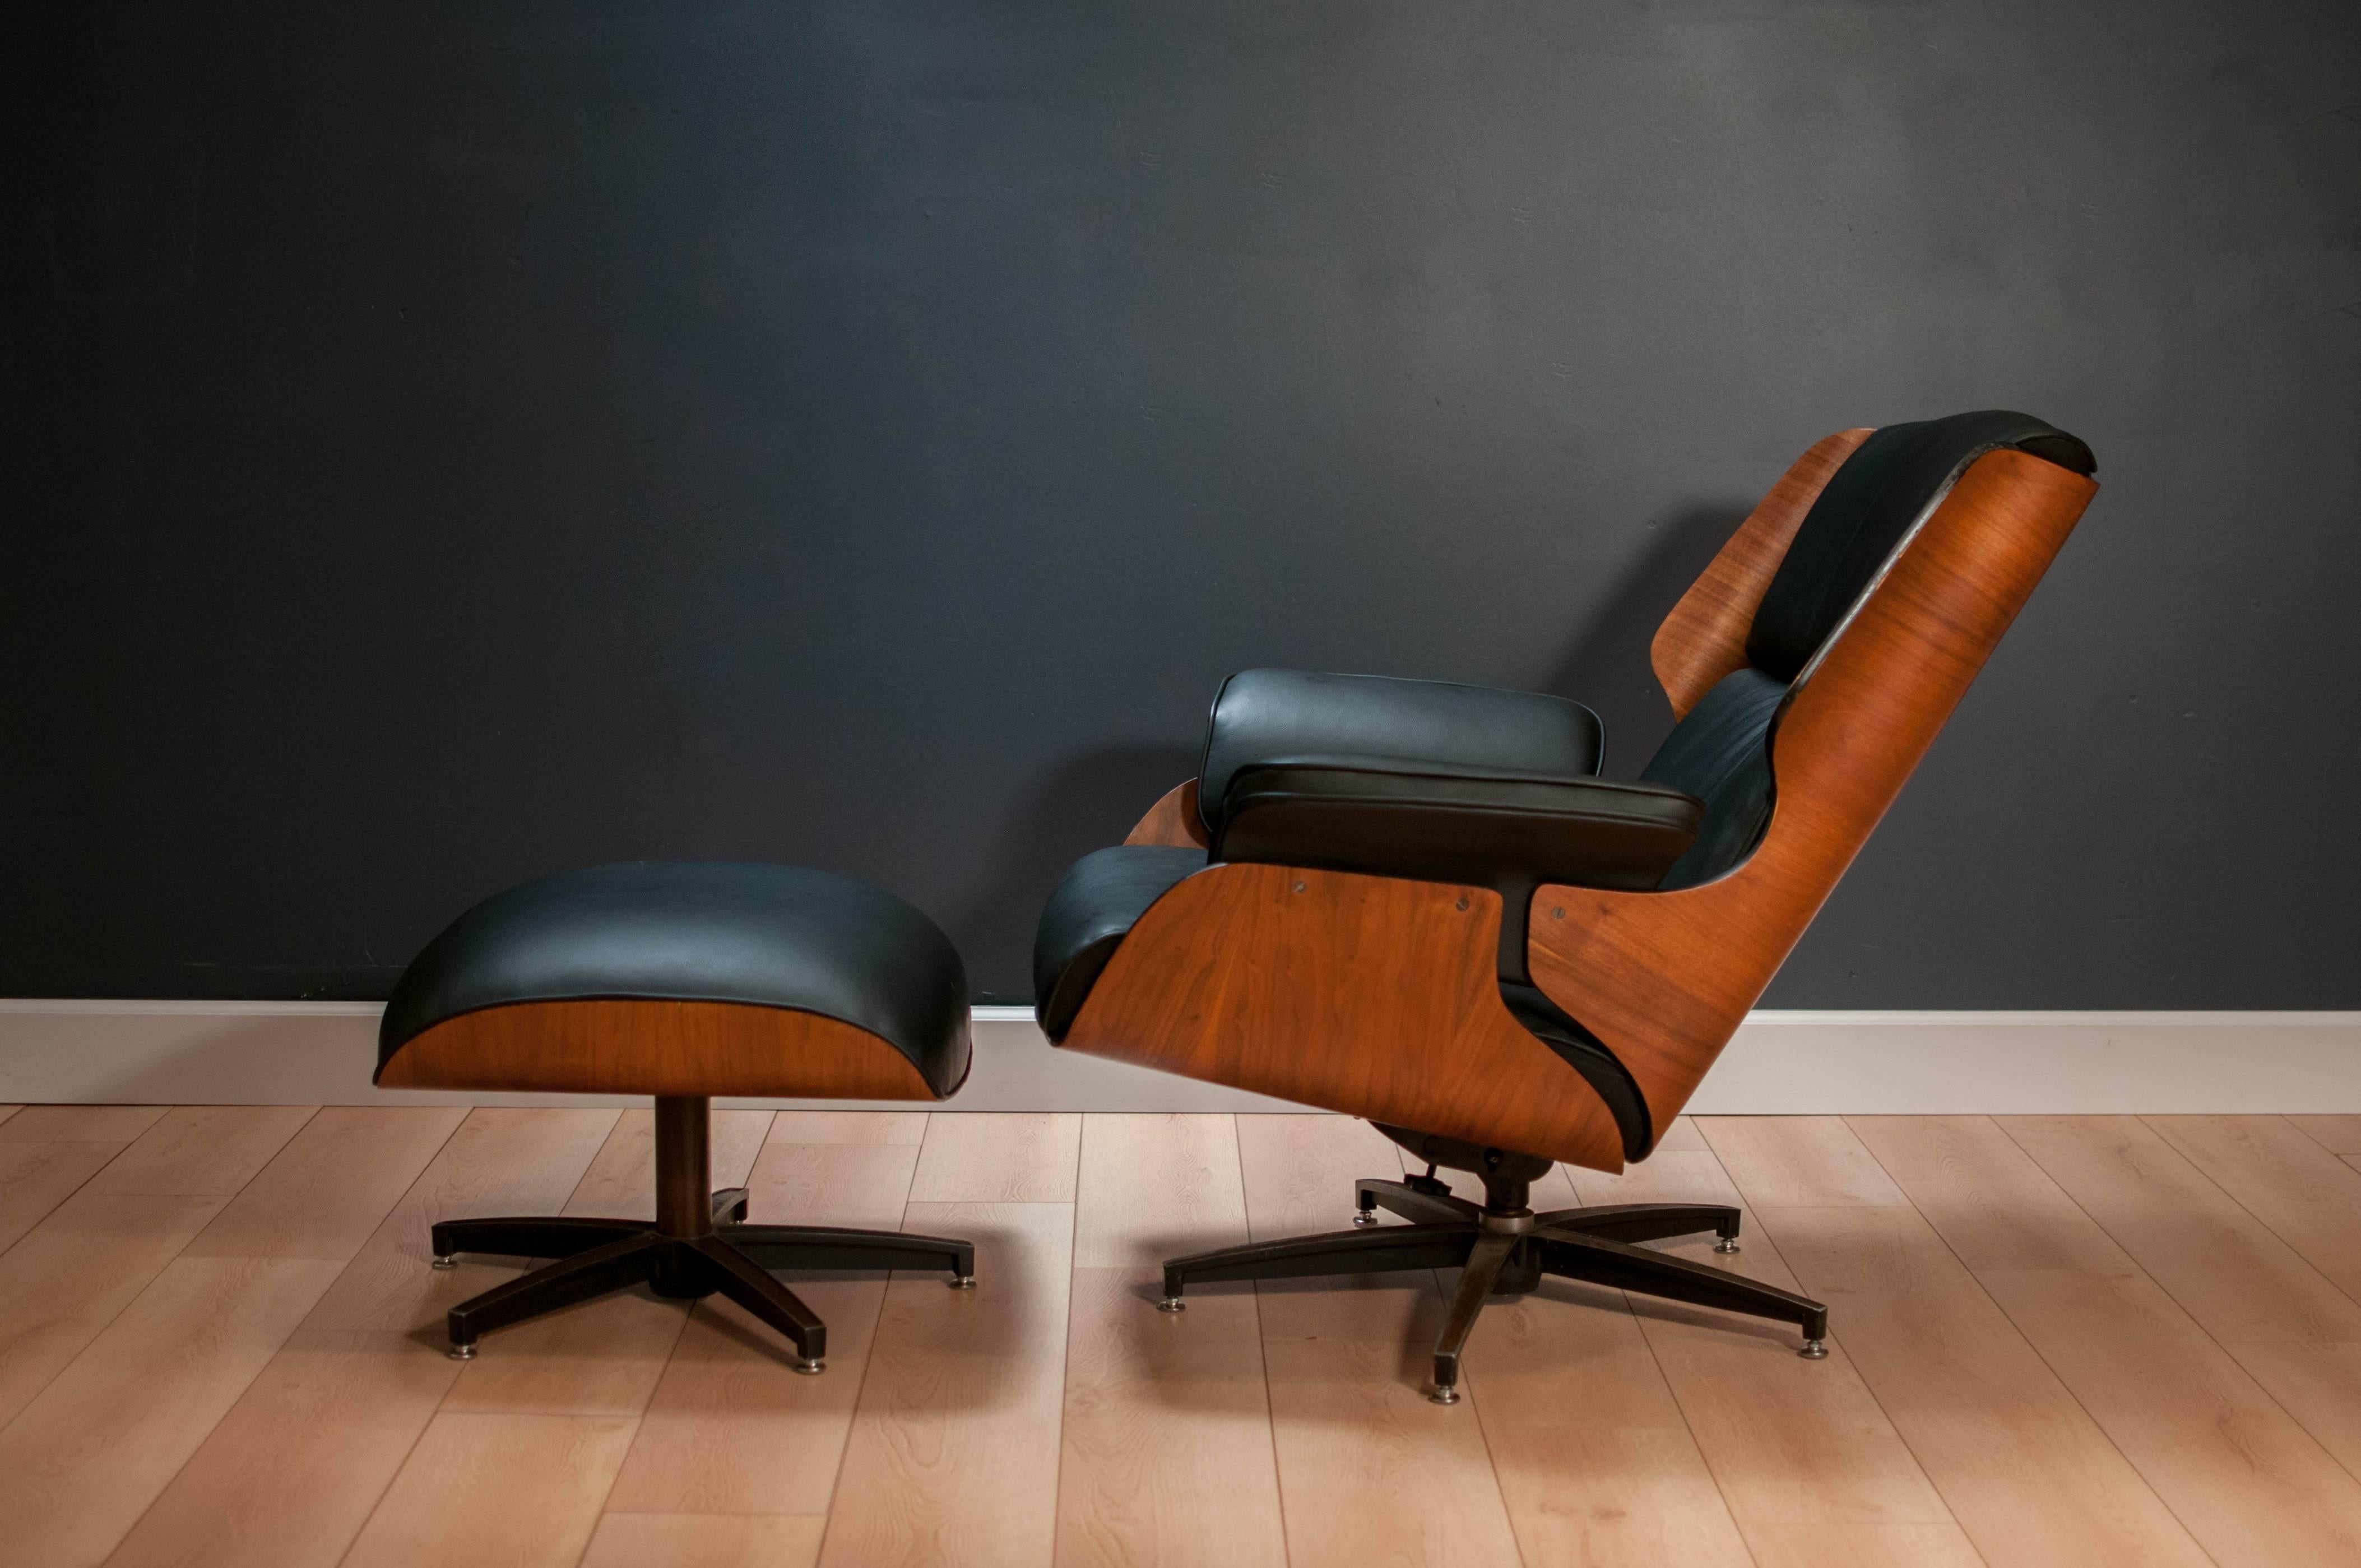 Mid-Century Modern Drexel declaration lounge chair and ottoman designed by Kipp Stewart & Stewart McDougall. This piece features a stunning bent plywood frame with walnut finish. Comfortable black leather cushions are perfect for lounging. Lounge